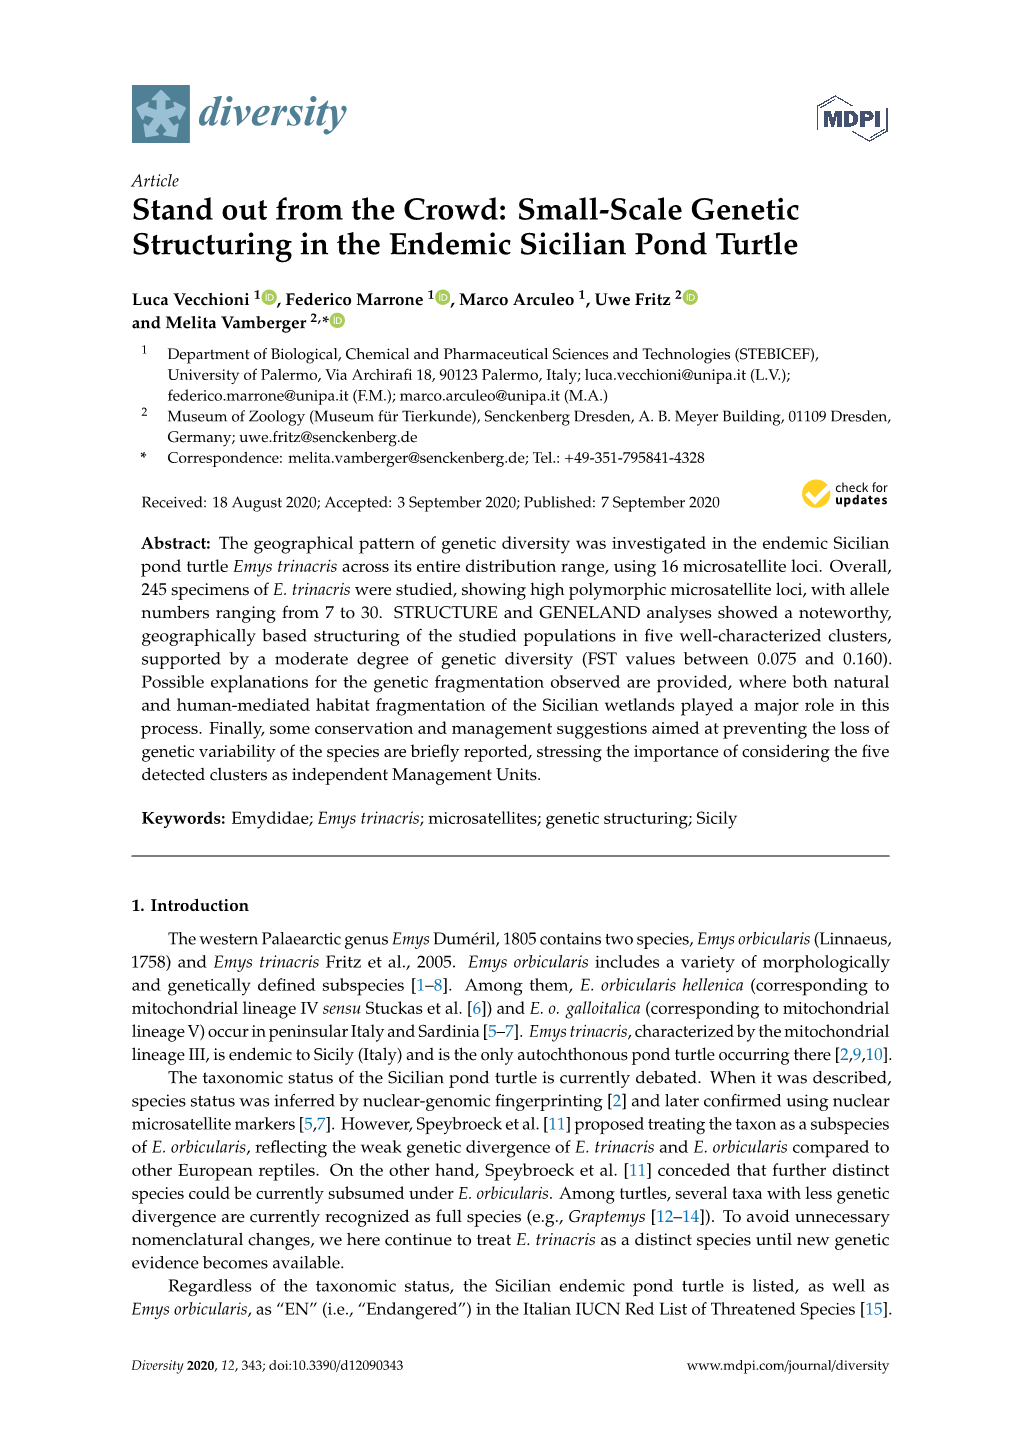 Small-Scale Genetic Structuring in the Endemic Sicilian Pond Turtle